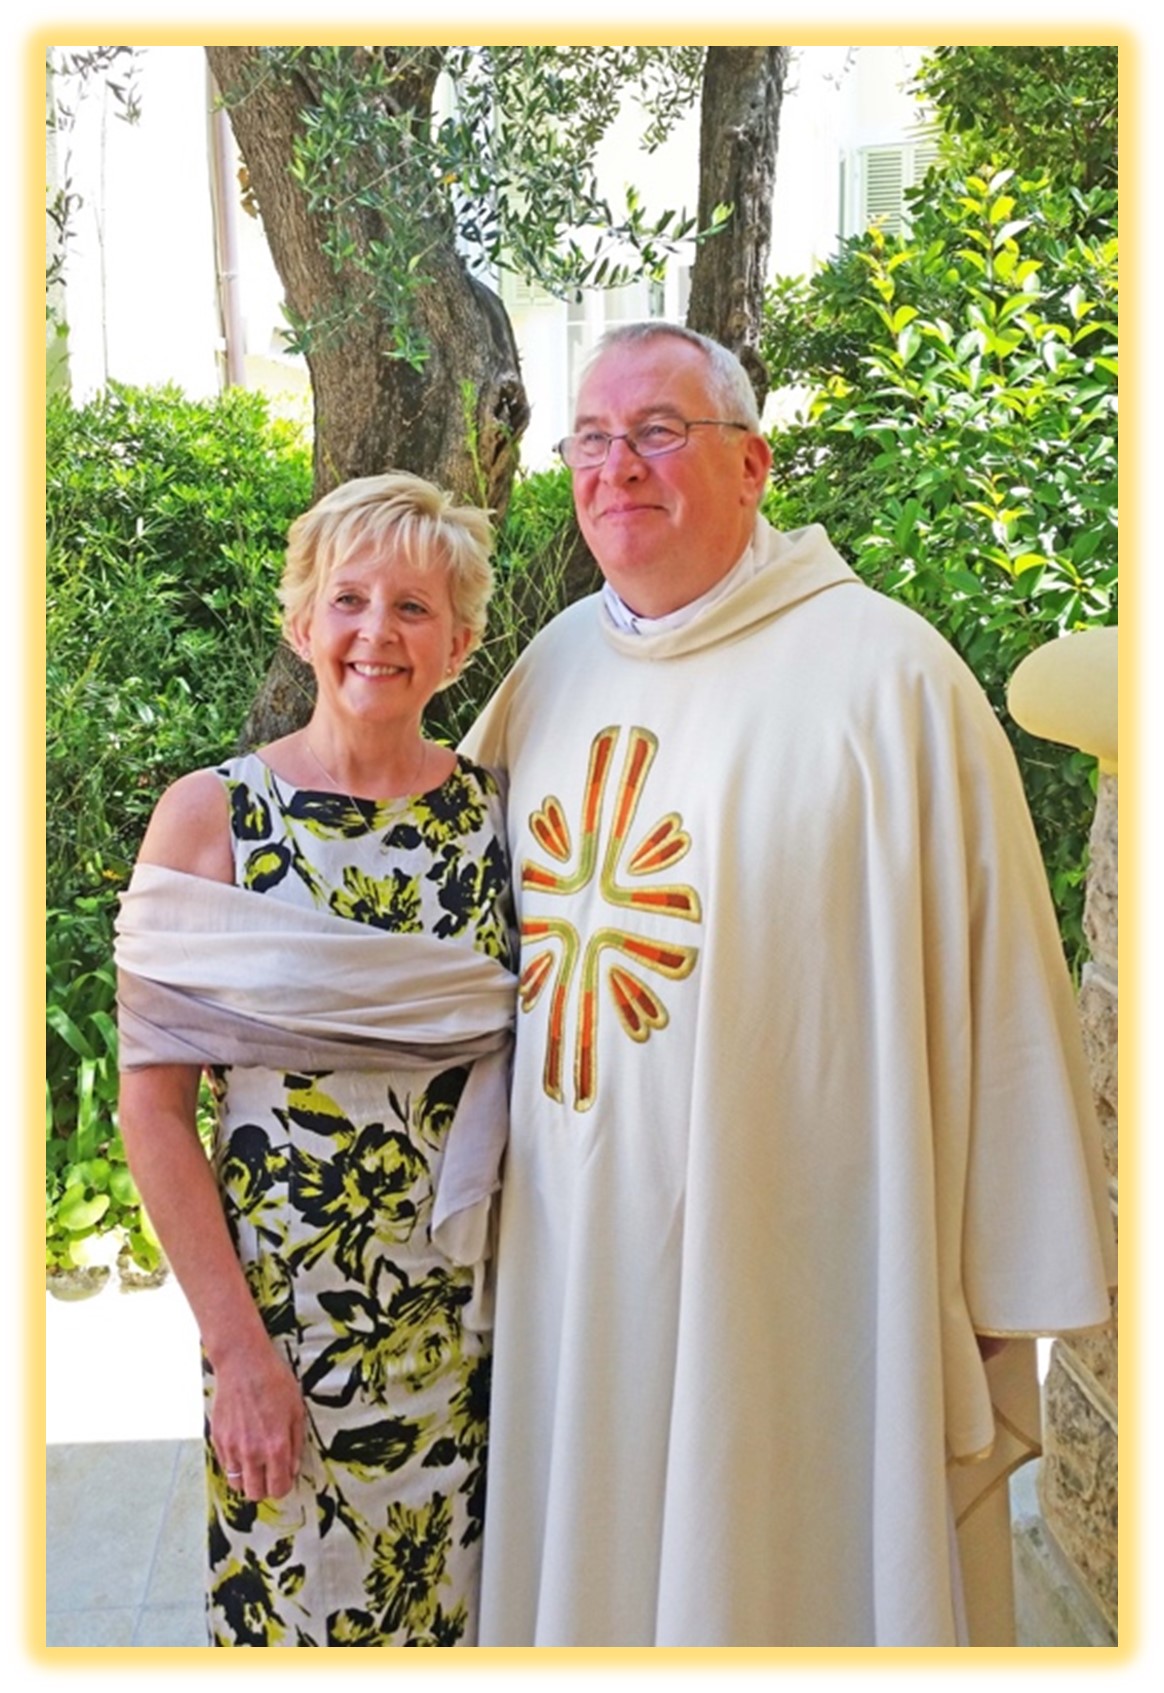 Father Tony Ingham and his wife Fiona